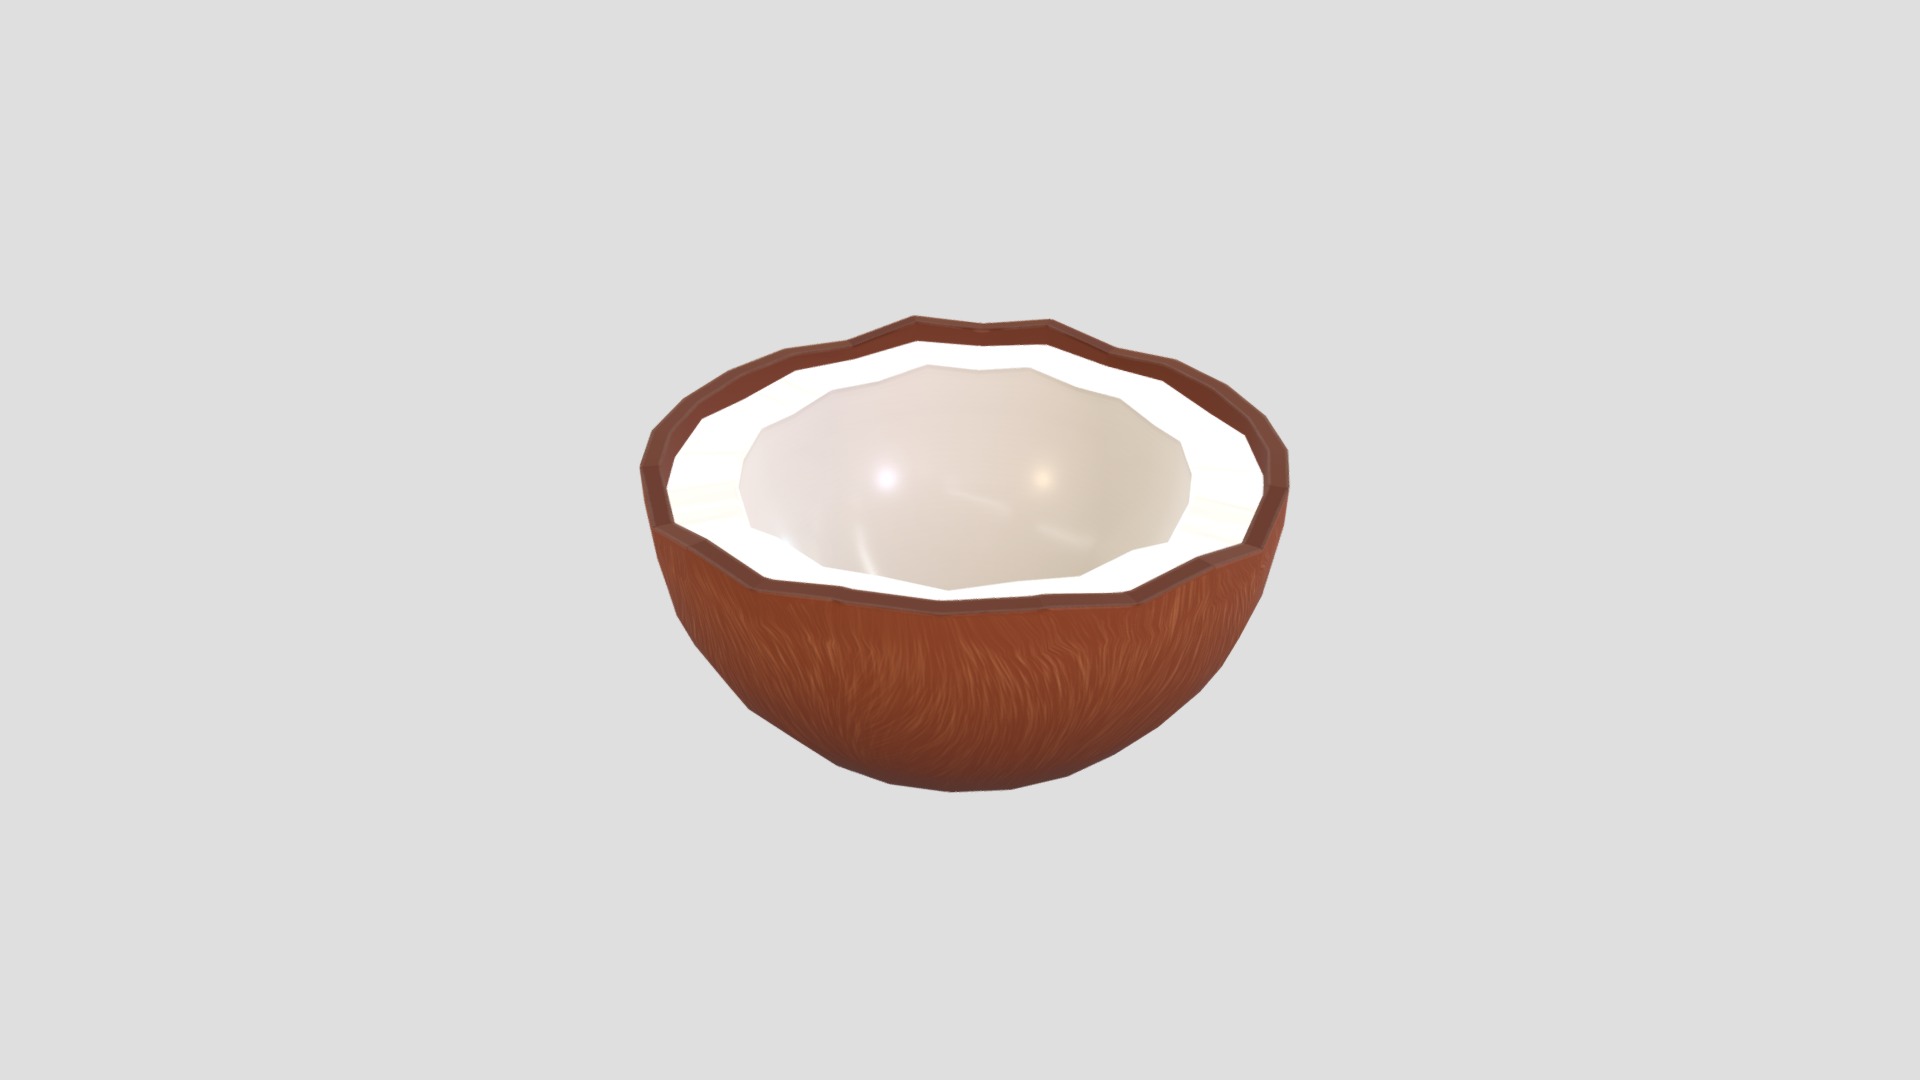 3D model Coconut - This is a 3D model of the Coconut. The 3D model is about a red and white circular object.